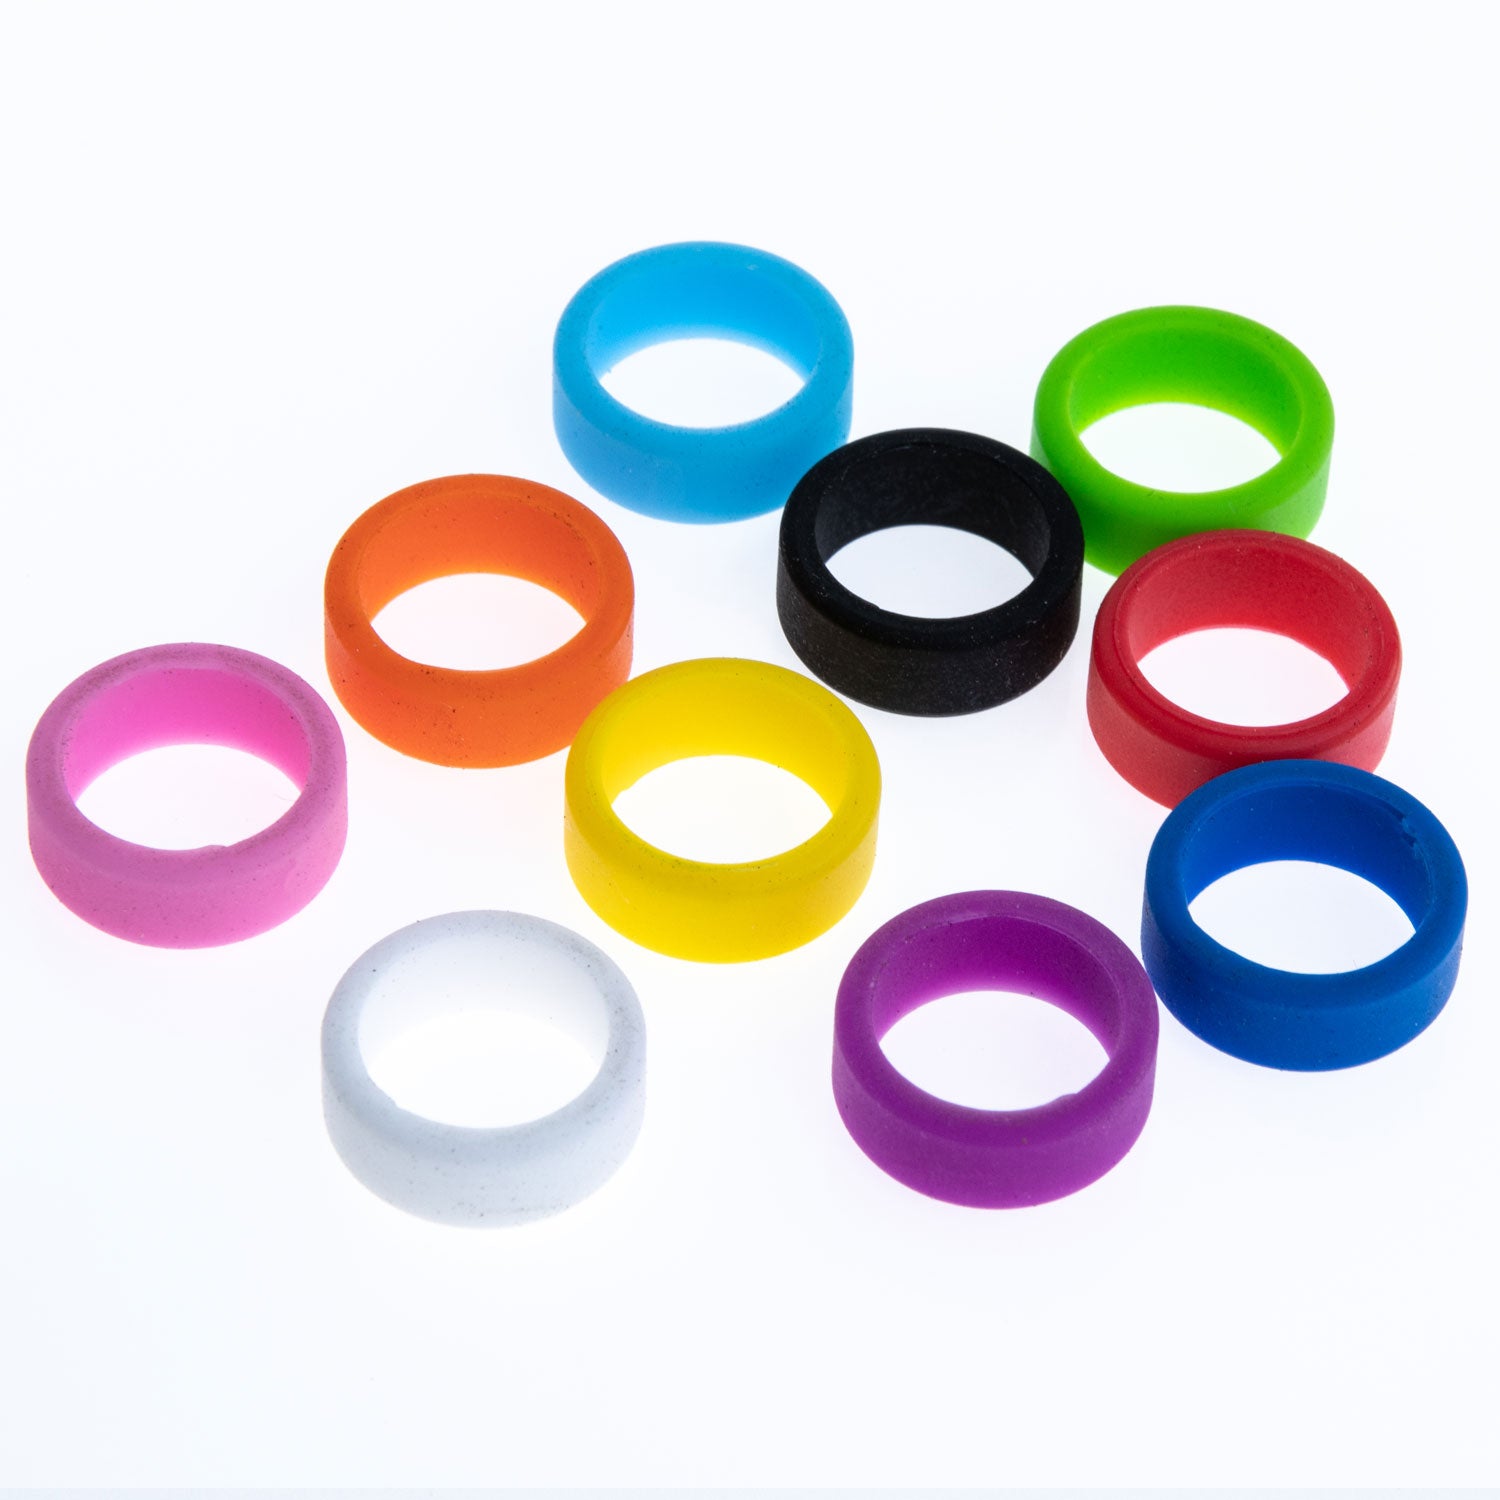 Grifiti Band Joes 1 x 0.25 inch Mini Silicone Bands 20 pack for Cords Rings Gaskets Wraps - Grifiti